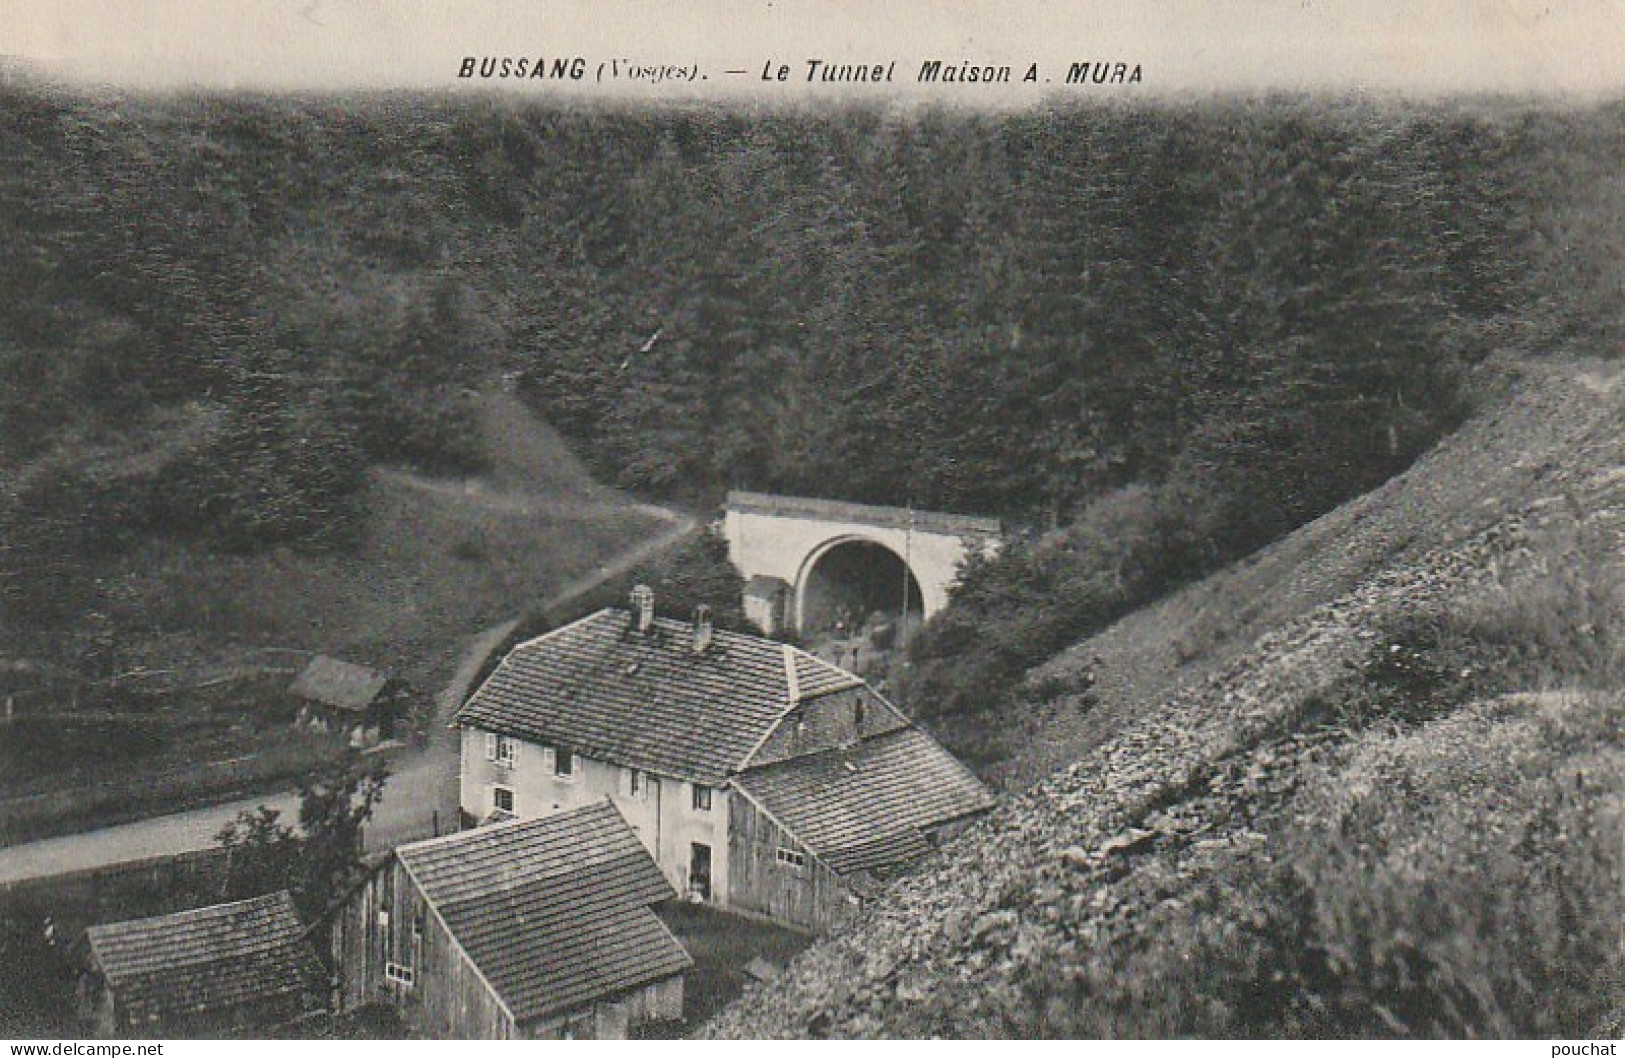 VE 11-(88) BUSSANG - LE TUNNEL - MAISON A . MURA - TAMPON CAFE RESTAURANT MURA (21/08/1909) - 2 SCANS - Bussang